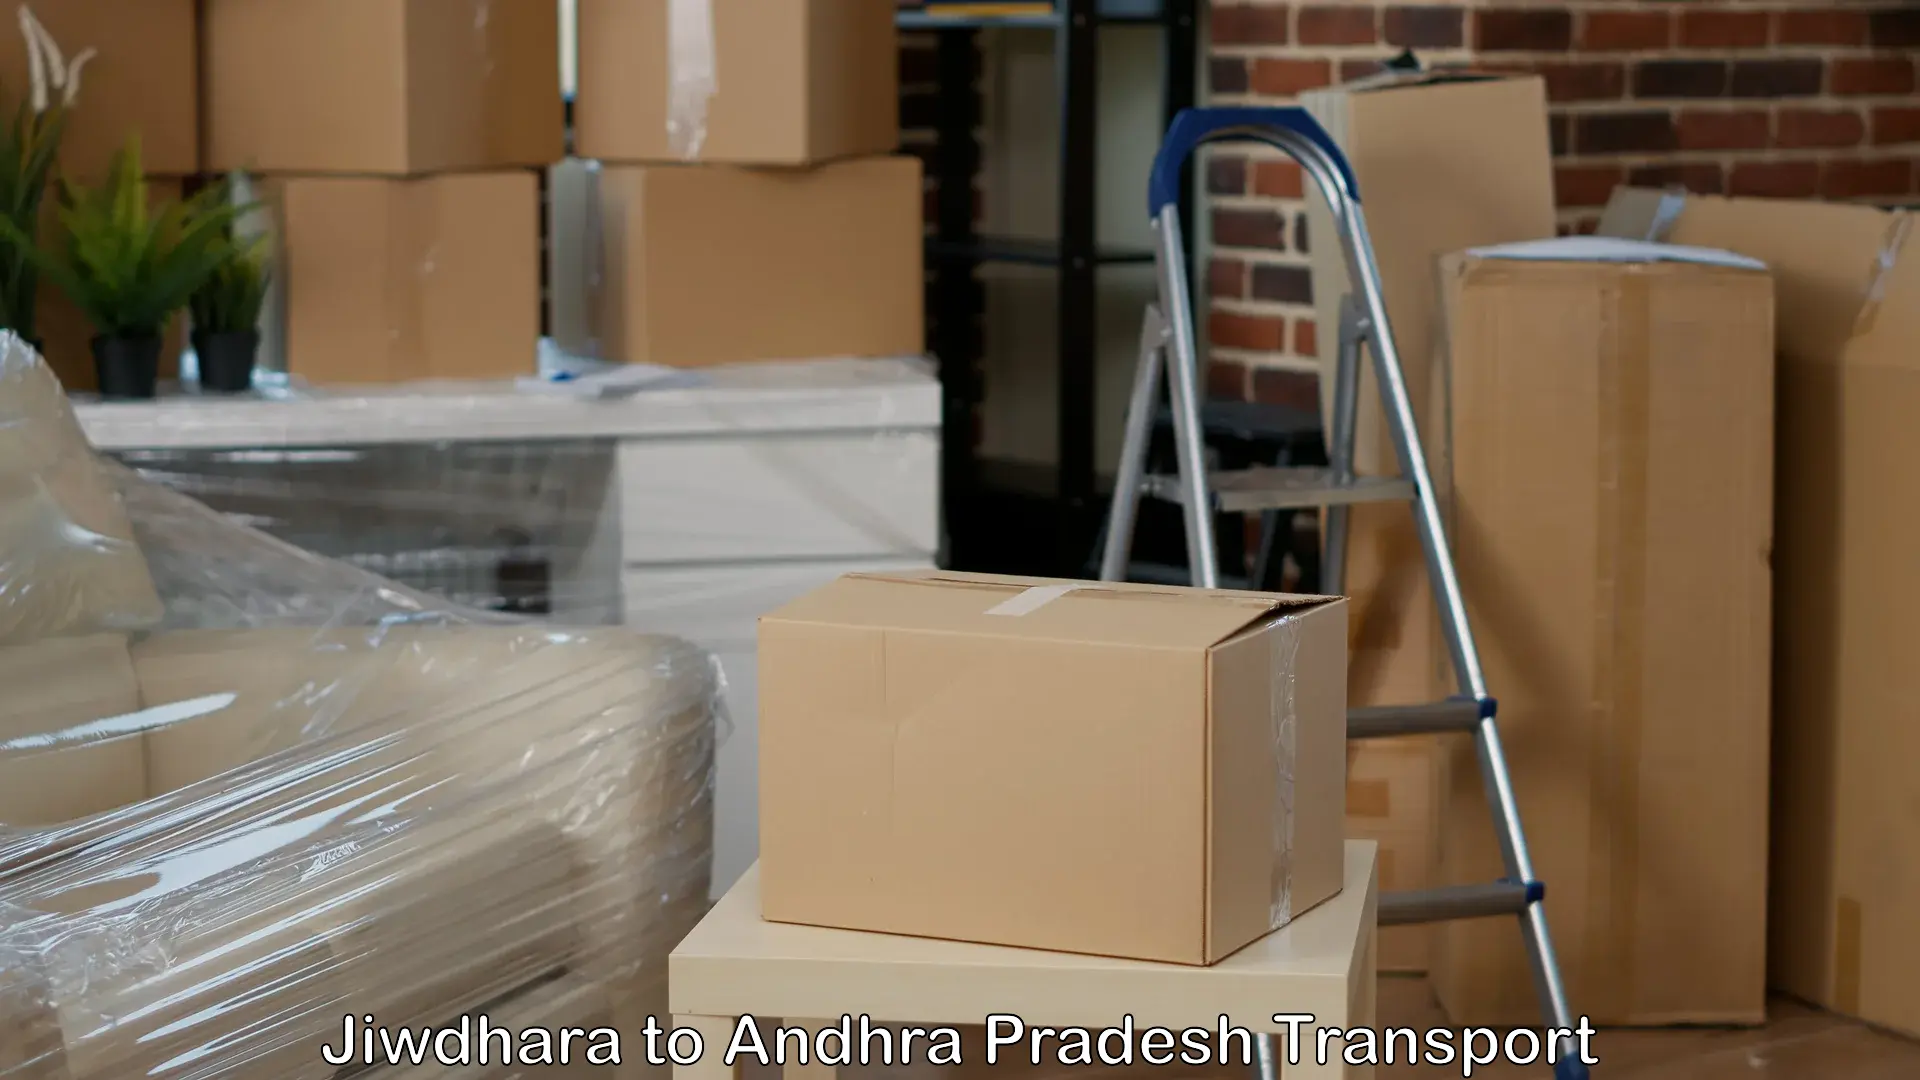 Express transport services in Jiwdhara to Madanapalle